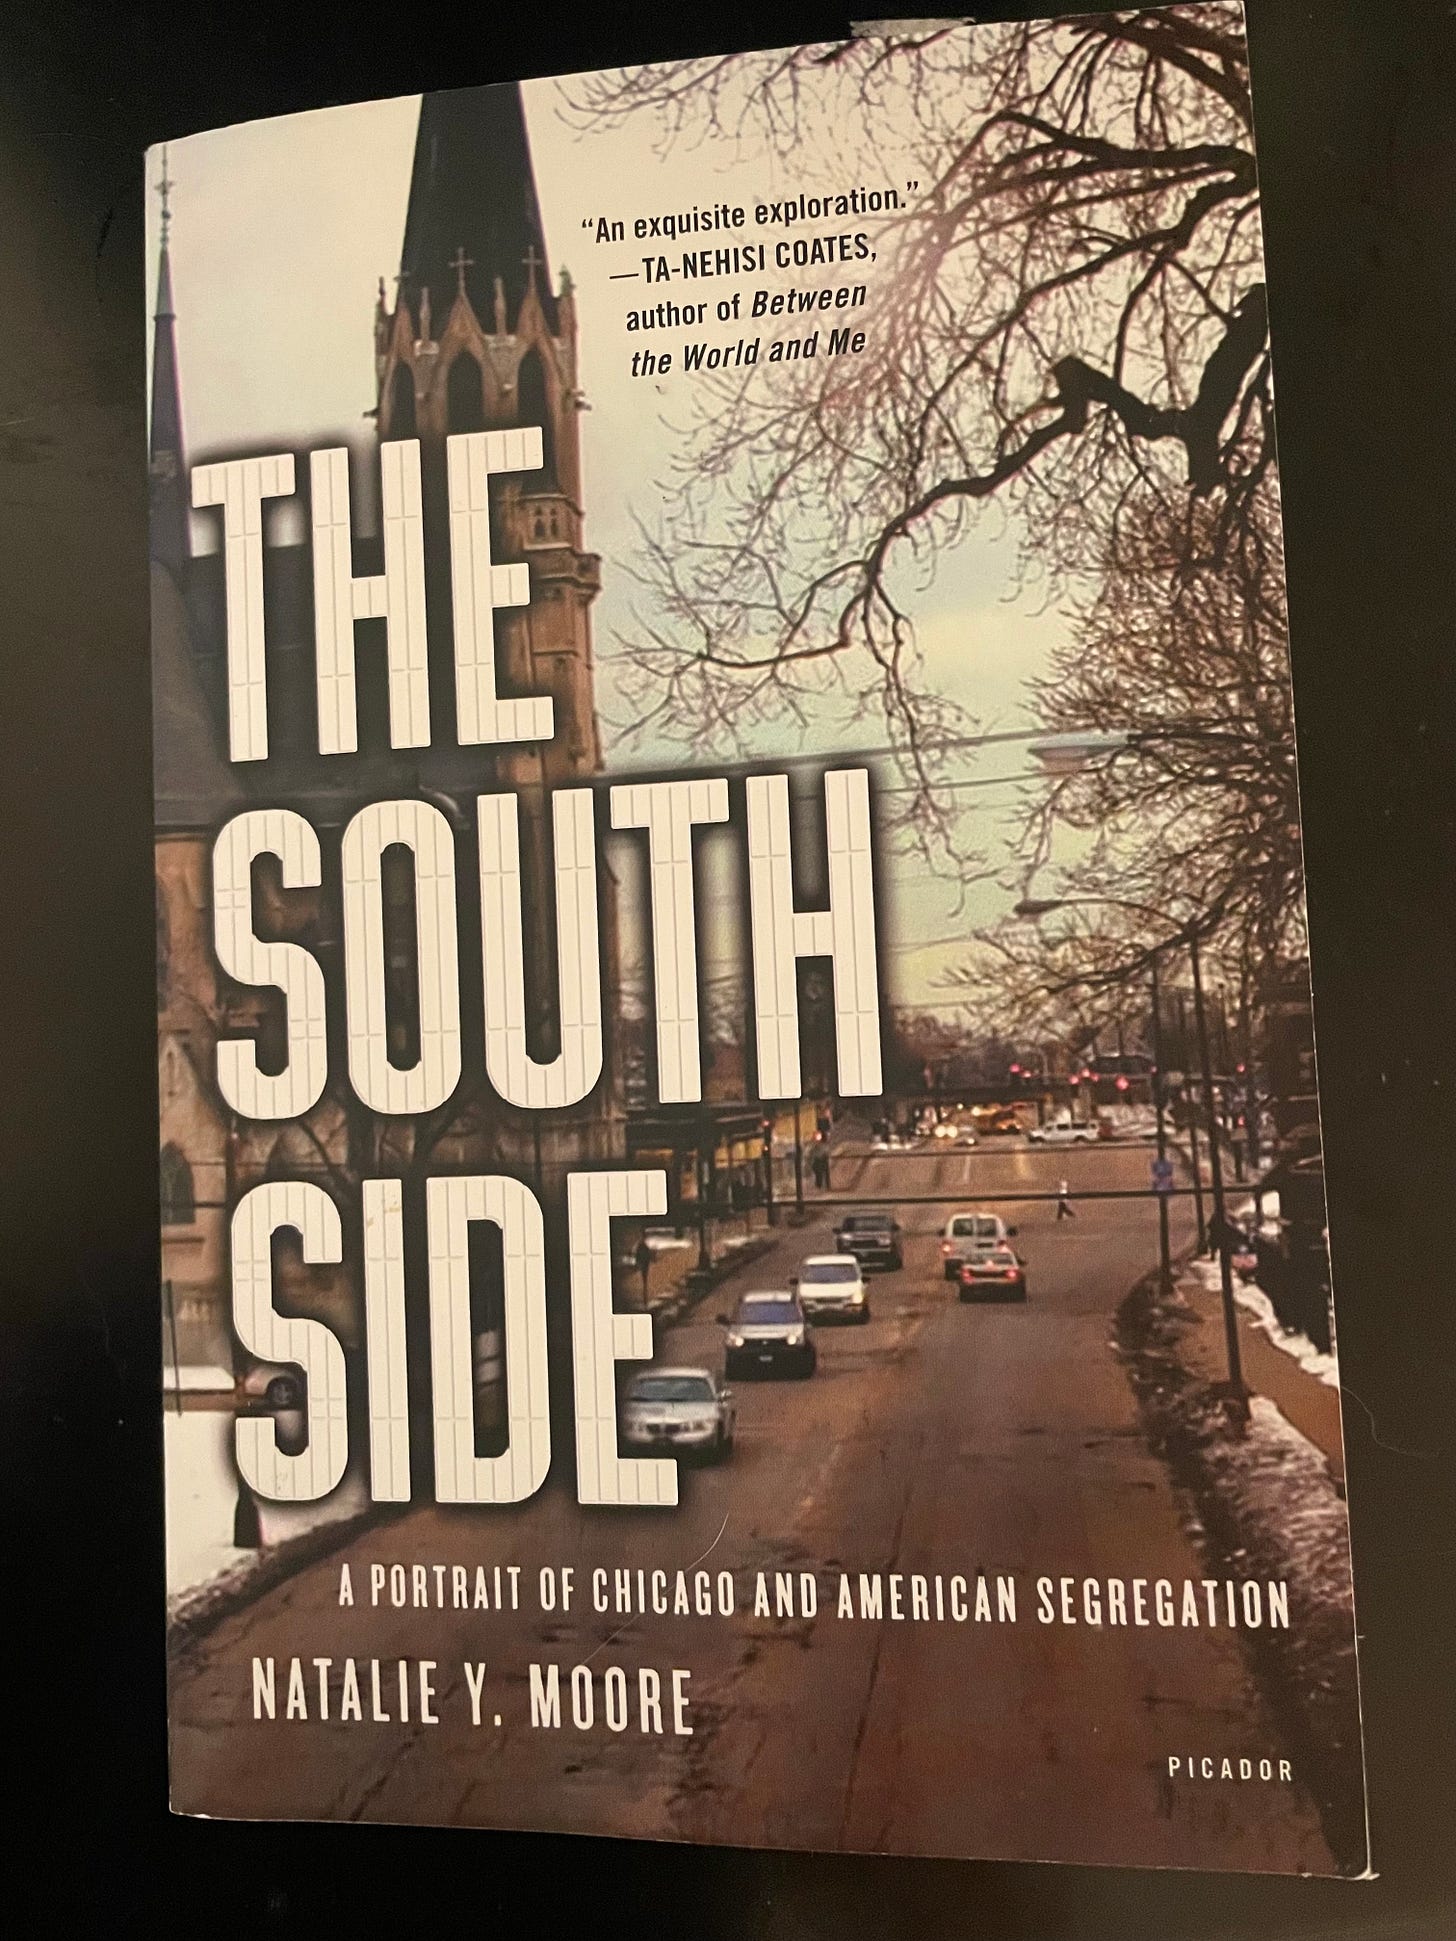 book: 'The South Side' by Natalie Y. Moore